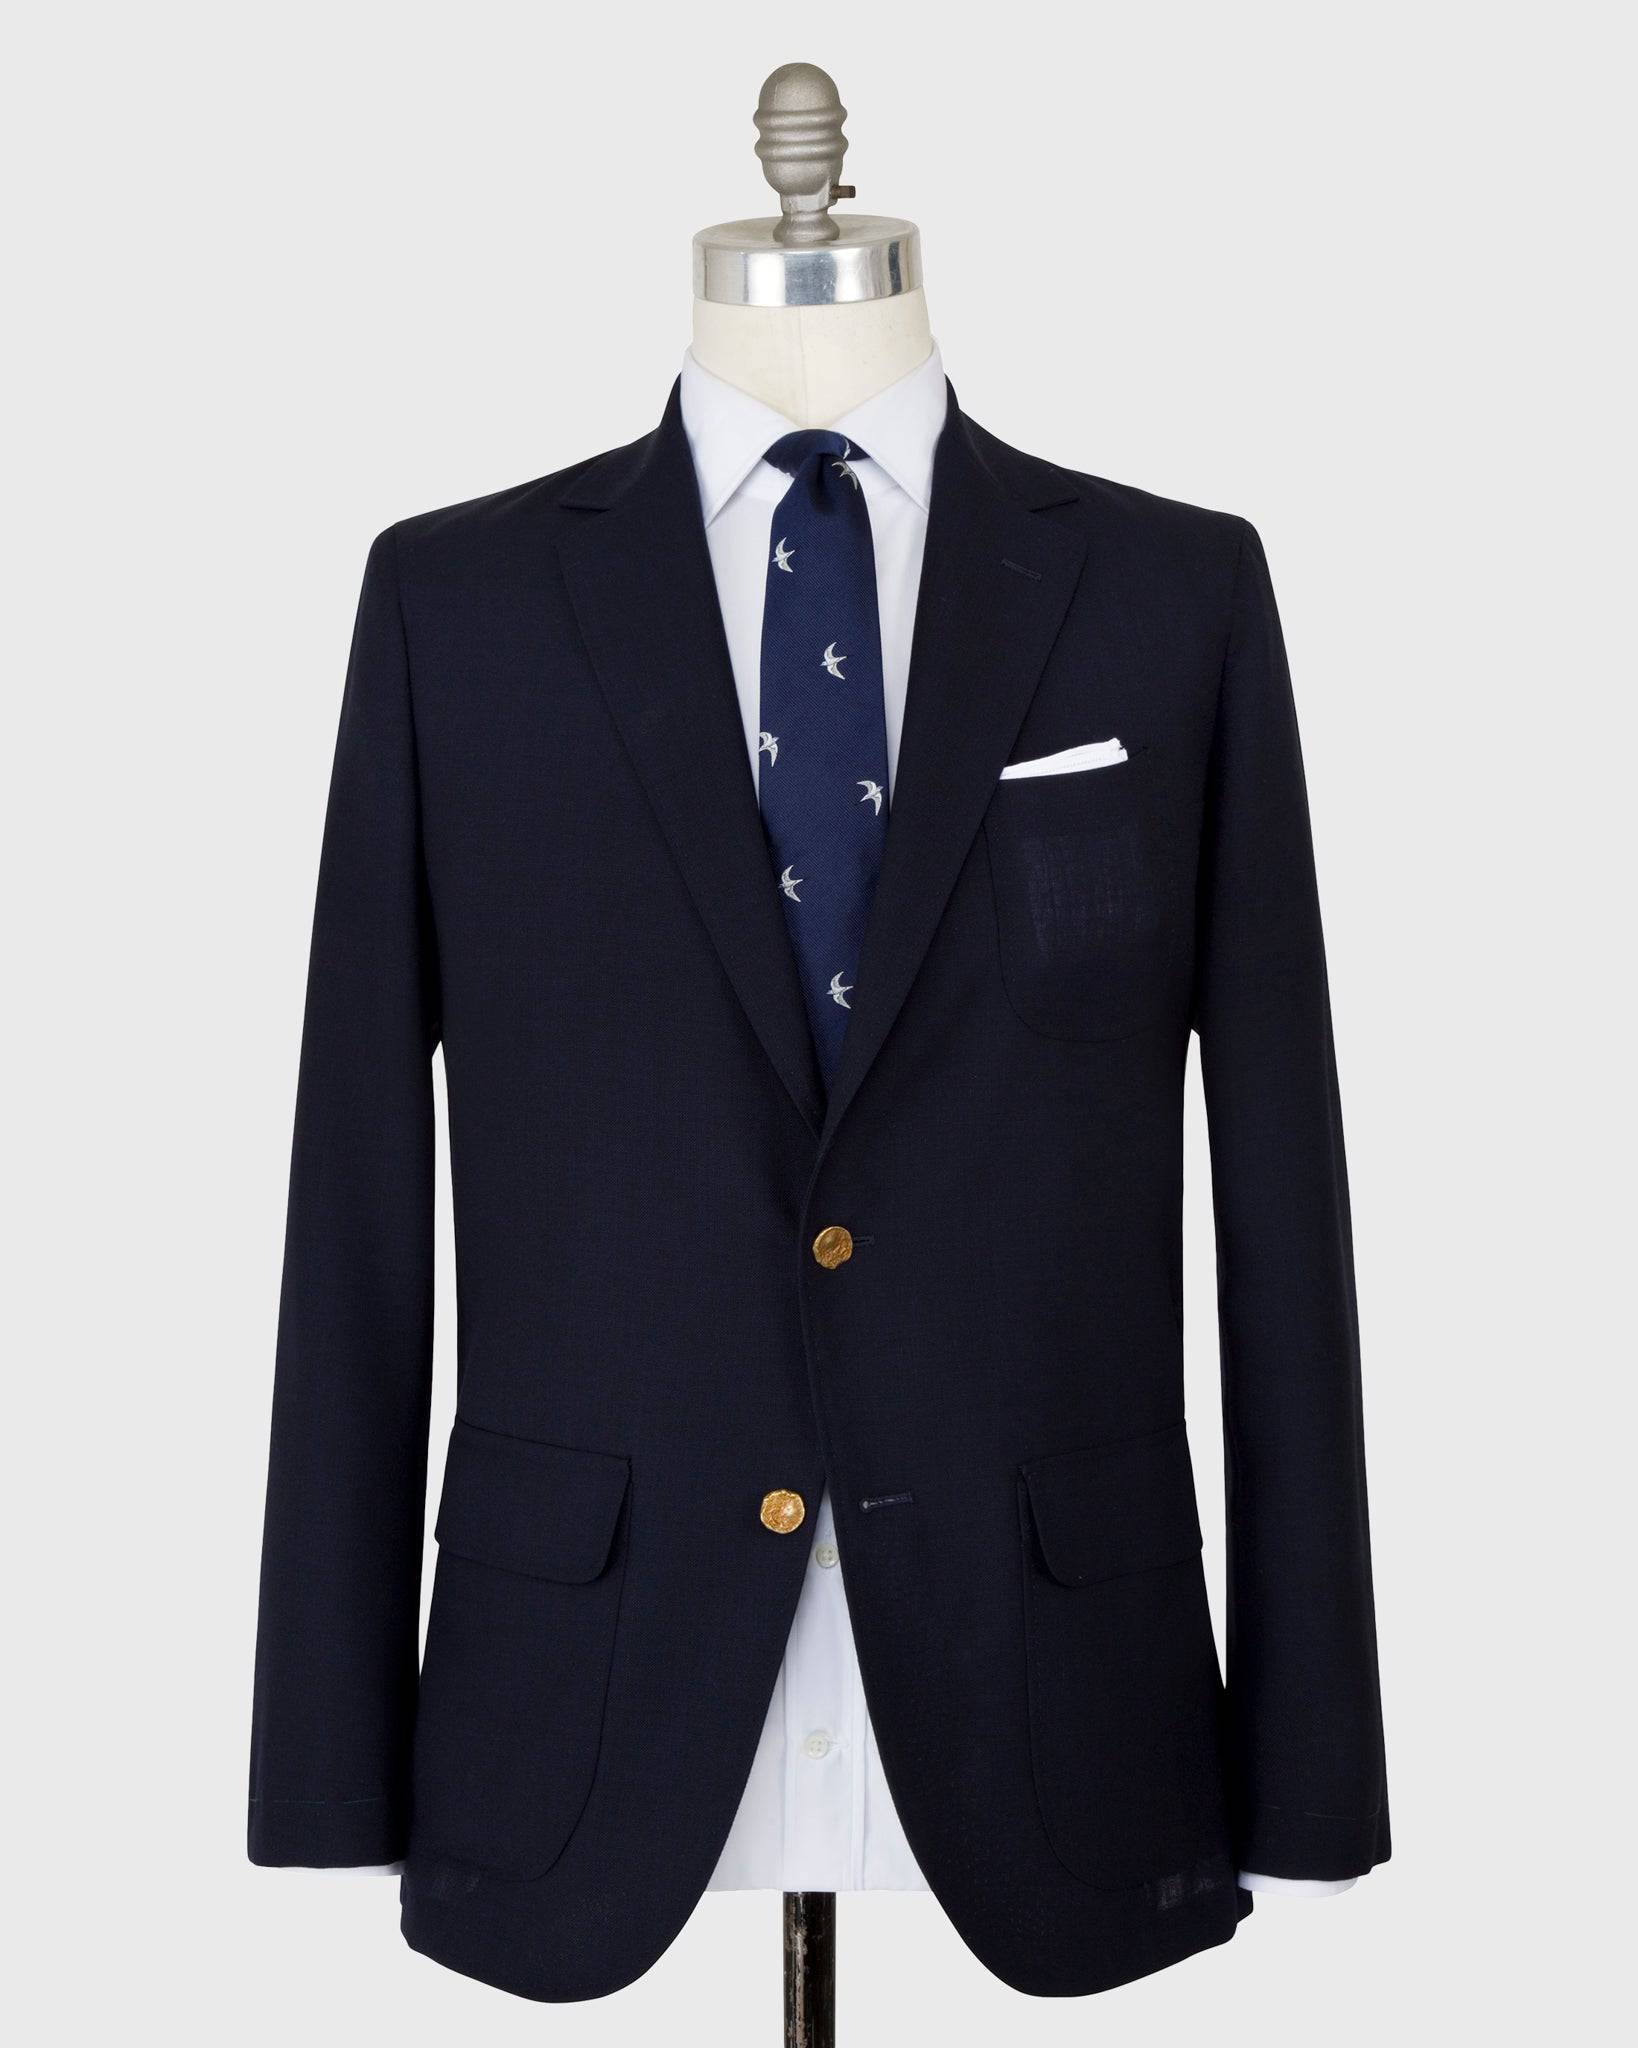 The Sid Mashburn Navy Ghost Blazer on a mannequin with white shirt and navy tie.